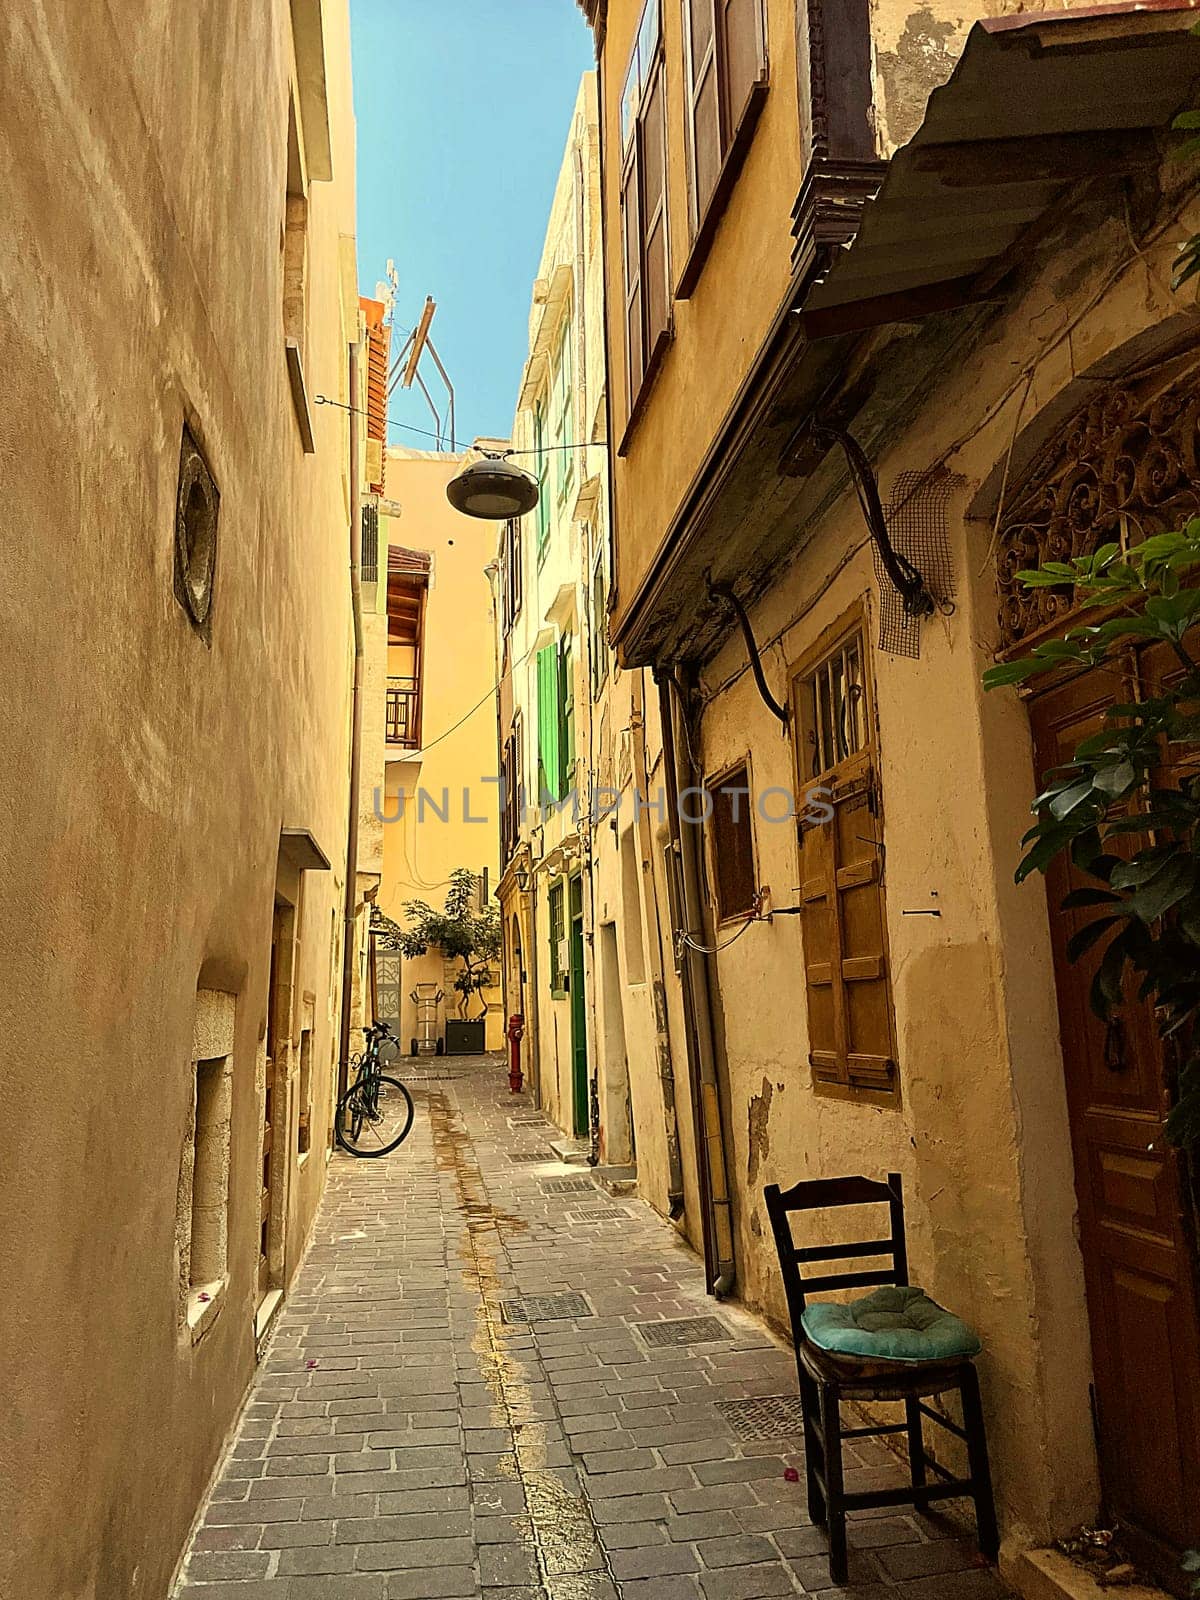 Beautiful old buildings, streets, stairs and alley ways in the town of Chania, Greece at 10 August 2023 by Costin